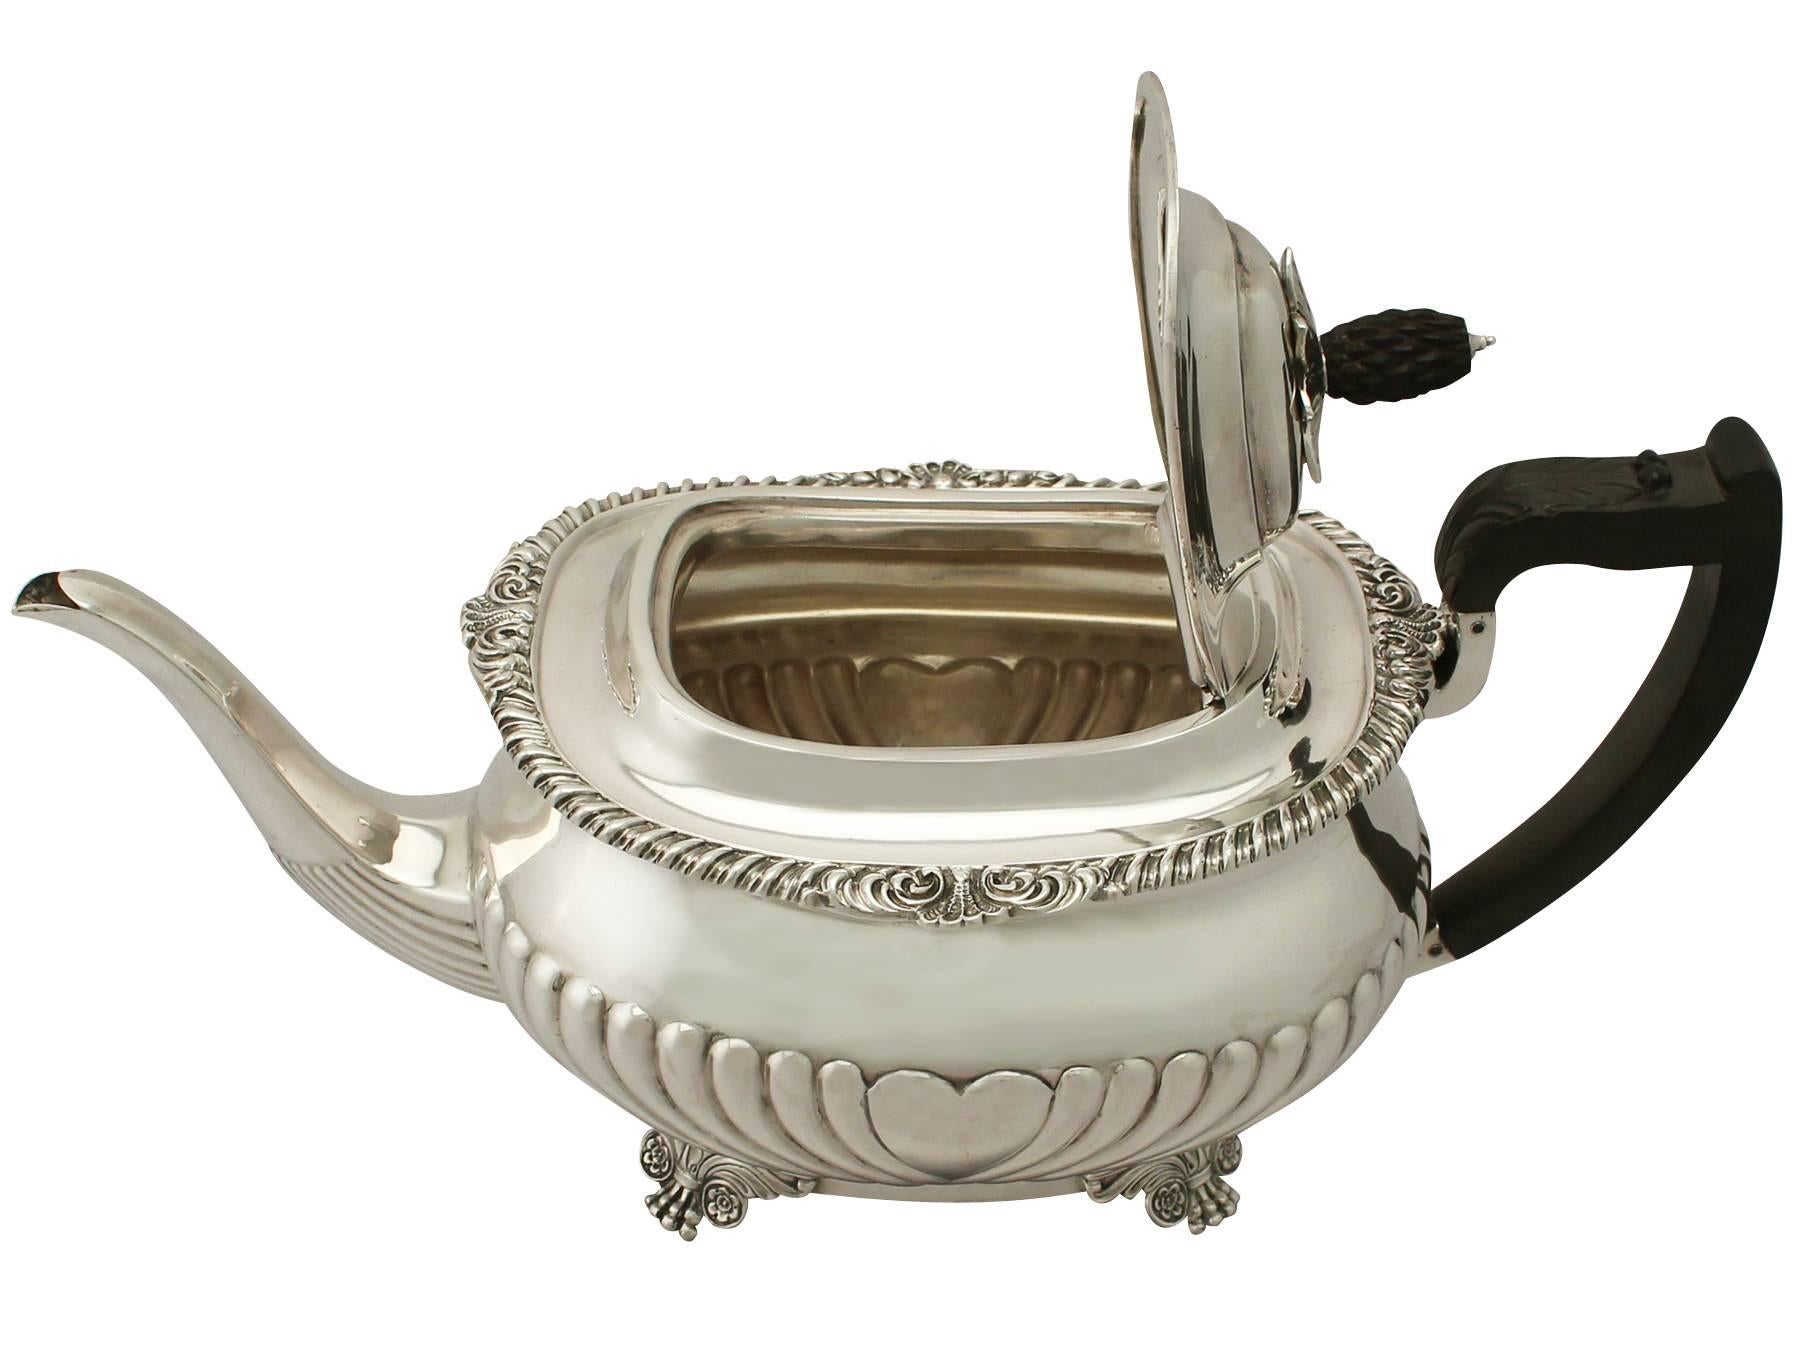 Painted Sterling Silver Teapot, Antique Victorian